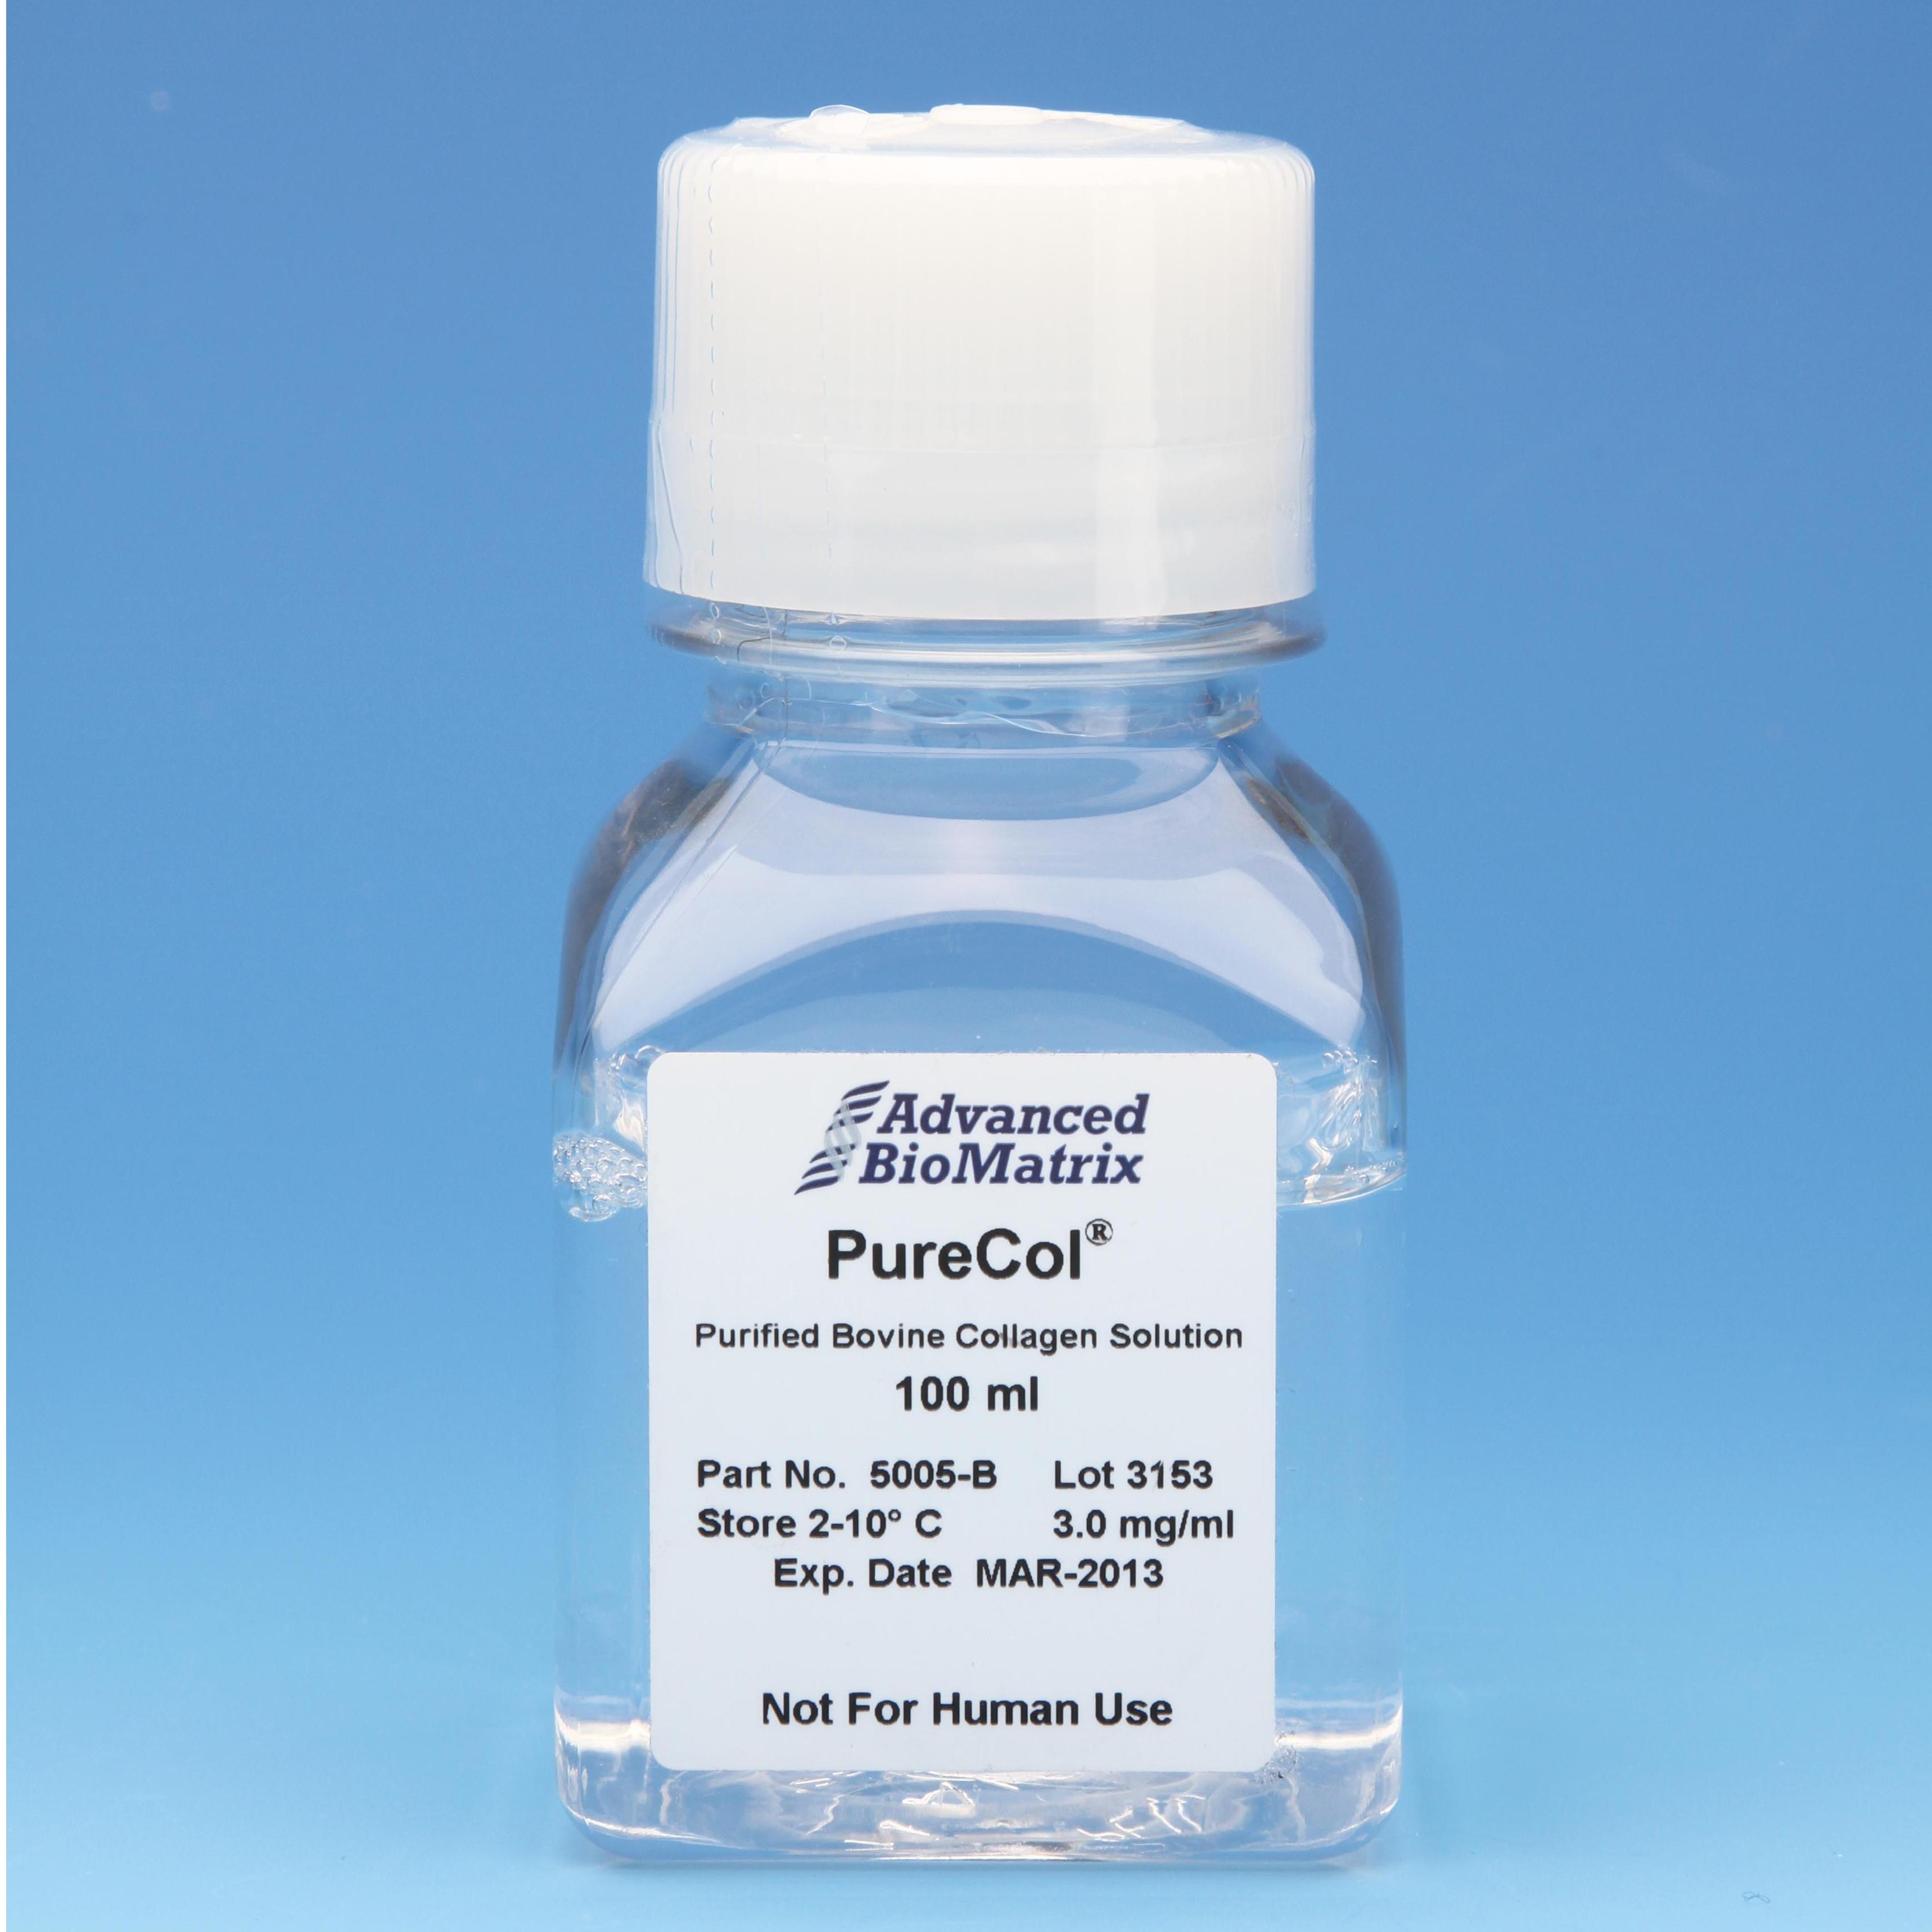 PureCol Type I Collagen Solution, 3 mg/ml from Advanced BioMatrix